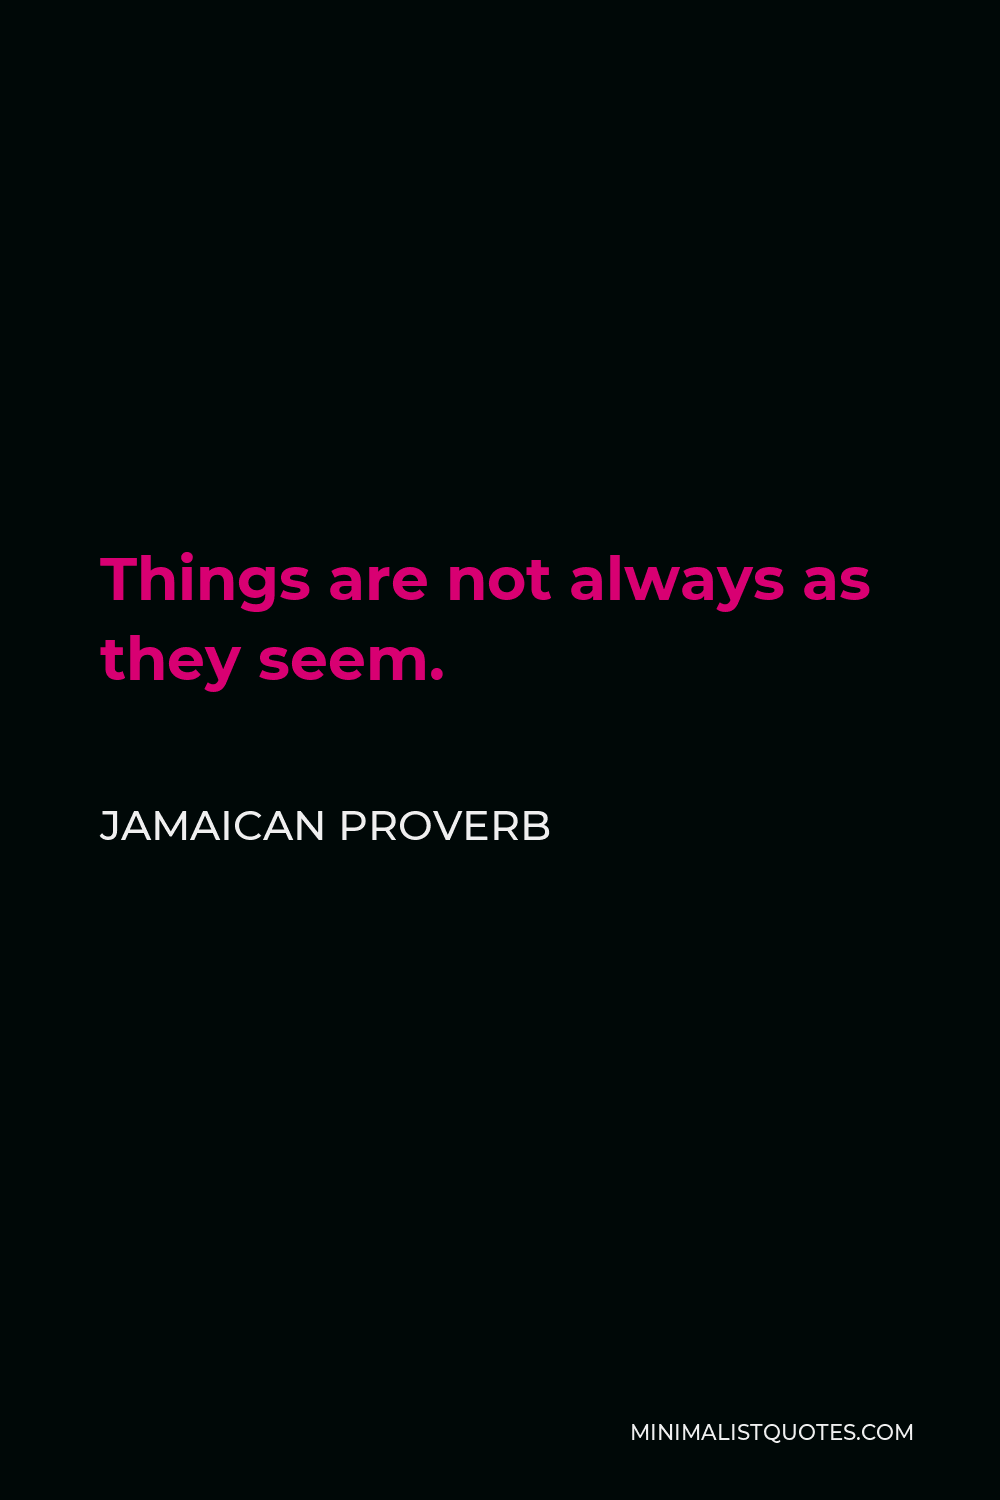 Jamaican Proverb Quote - Things are not always as they seem.